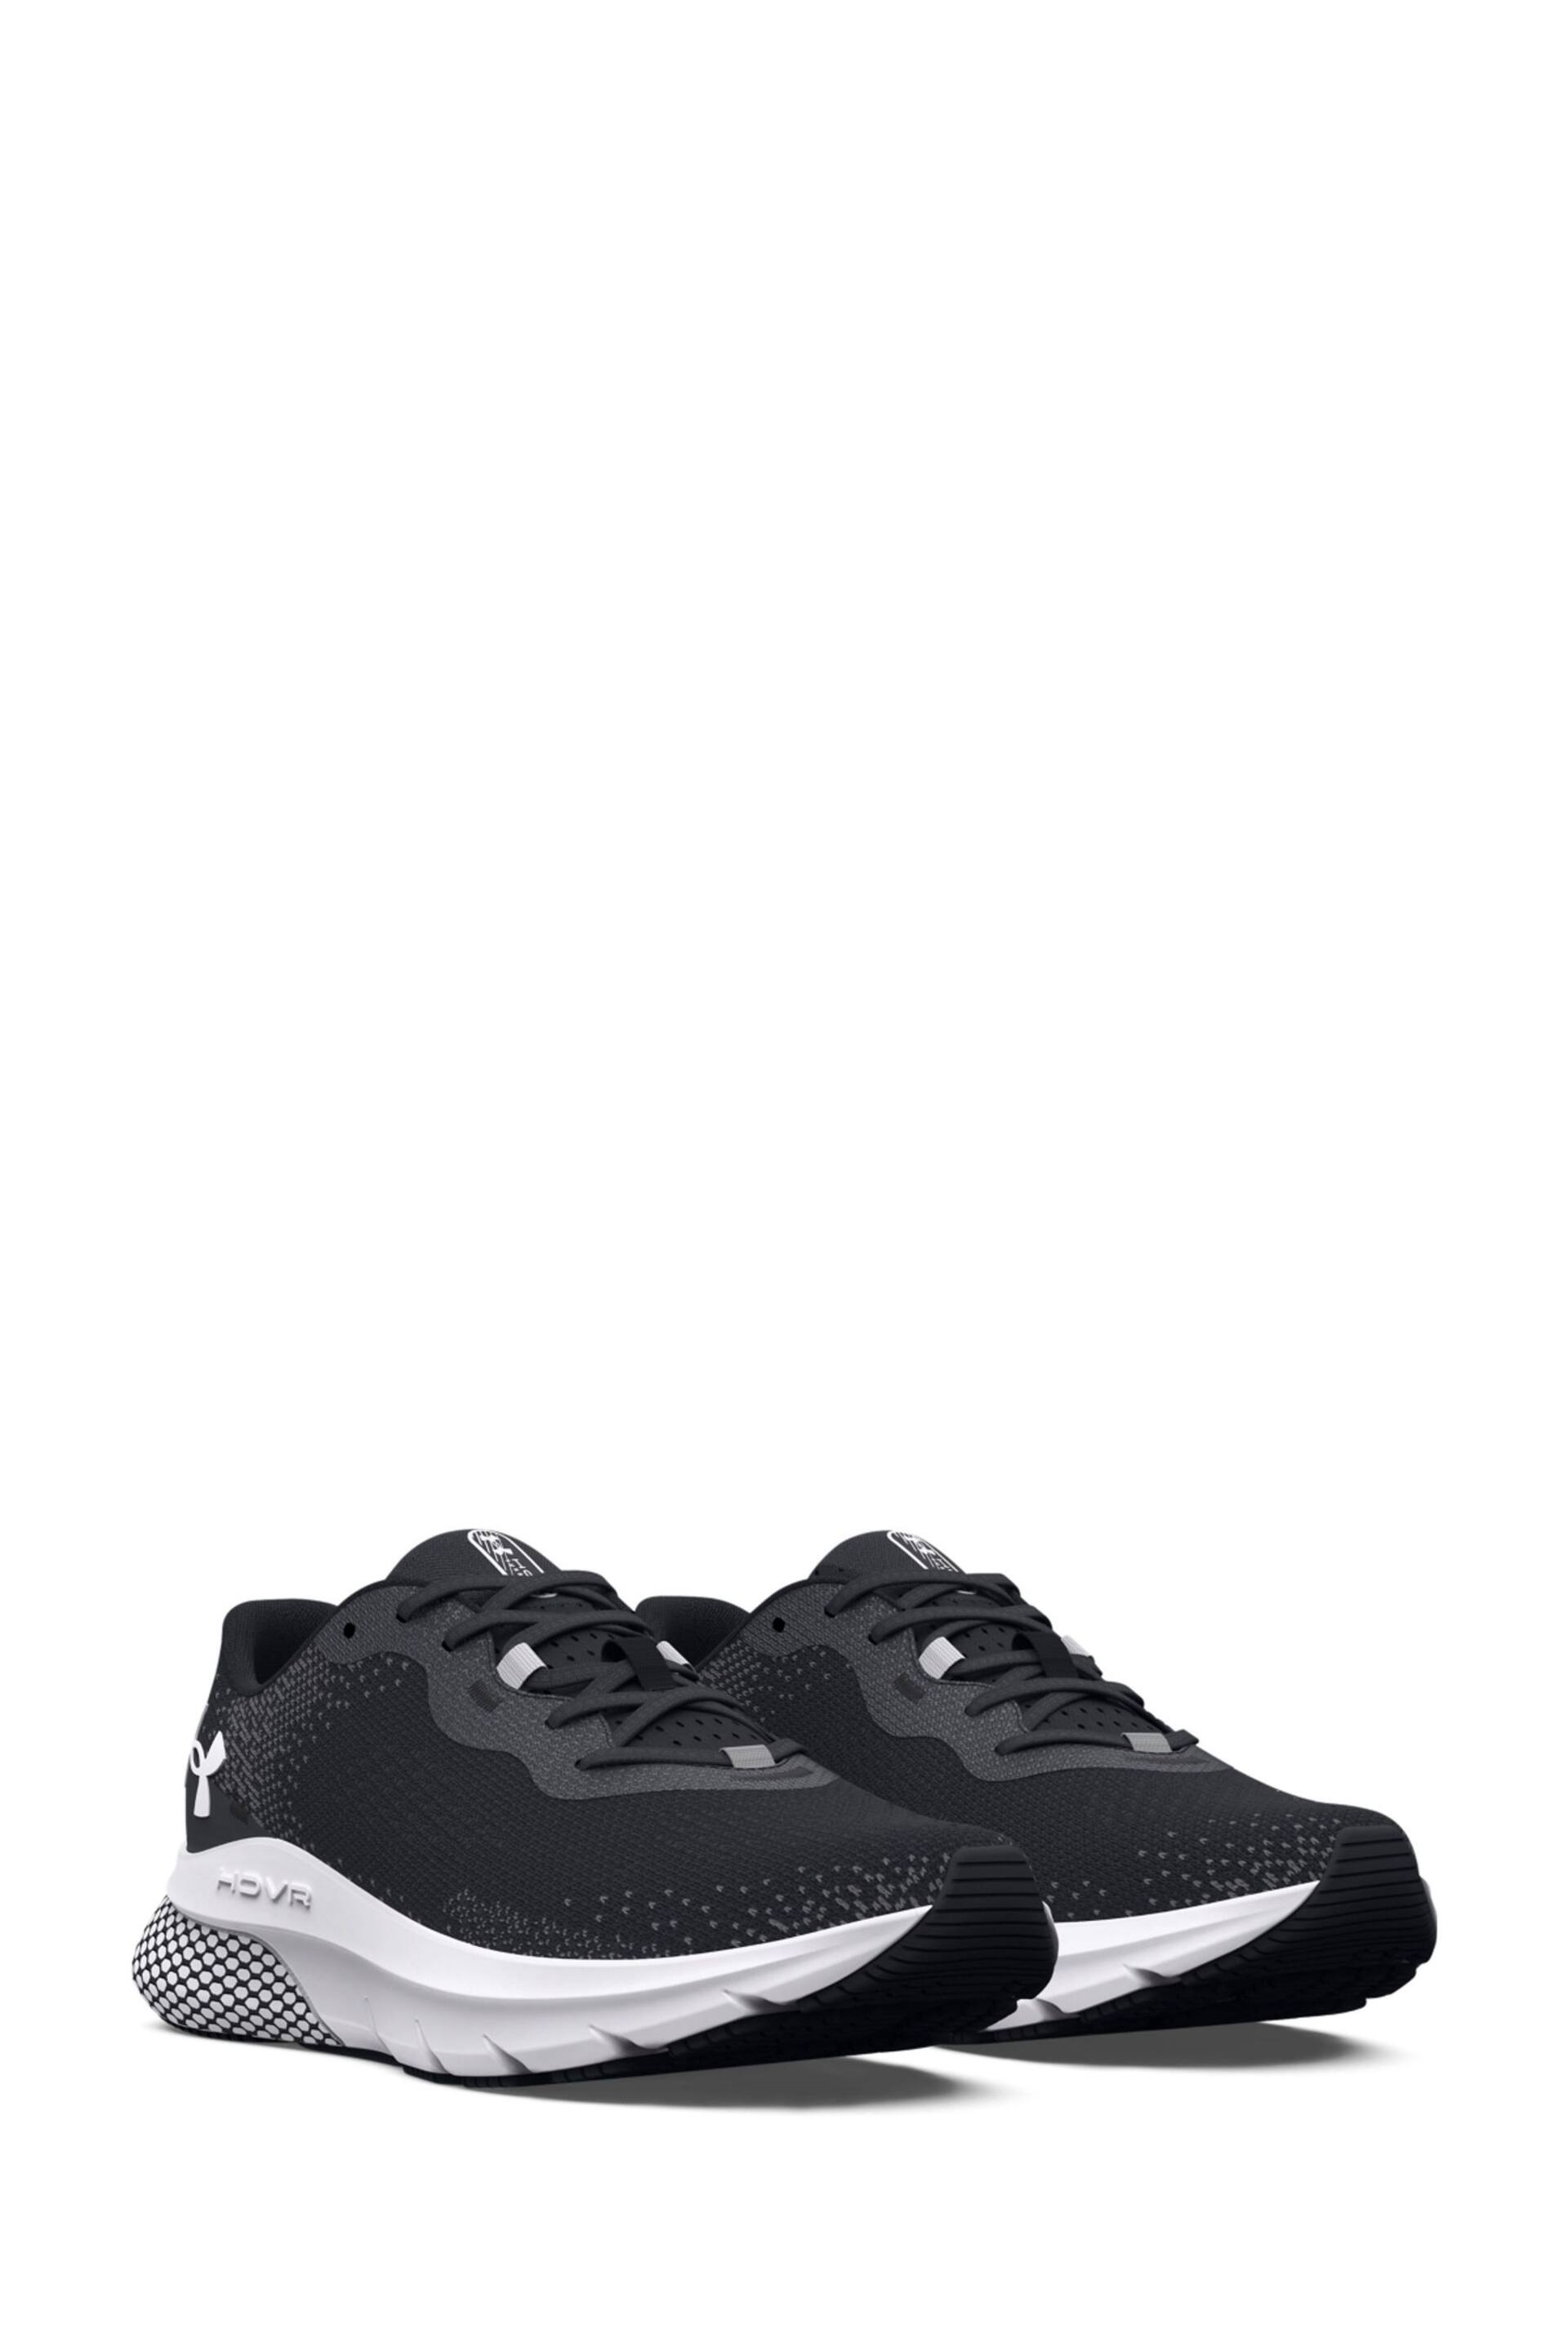 Under Armour Black HOVR Turbulence 2 Trainers - Image 3 of 5